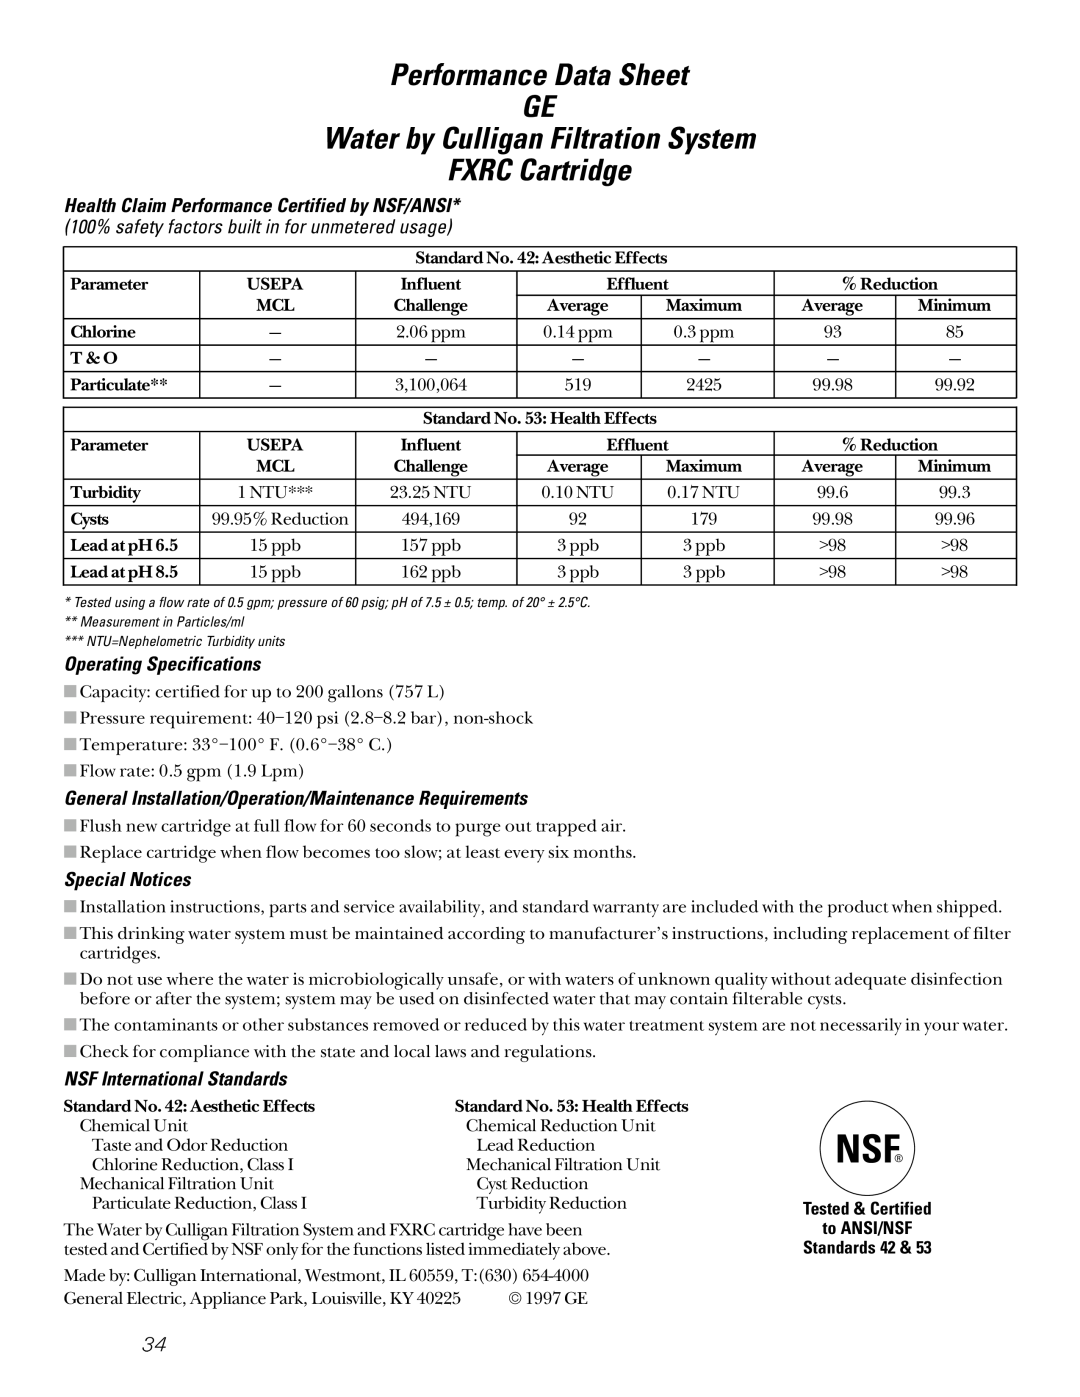 GE 162D9617P008 Performance Data Sheet GE, Water by Culligan Filtration System, FXRC Cartridge, Operating Specifications 